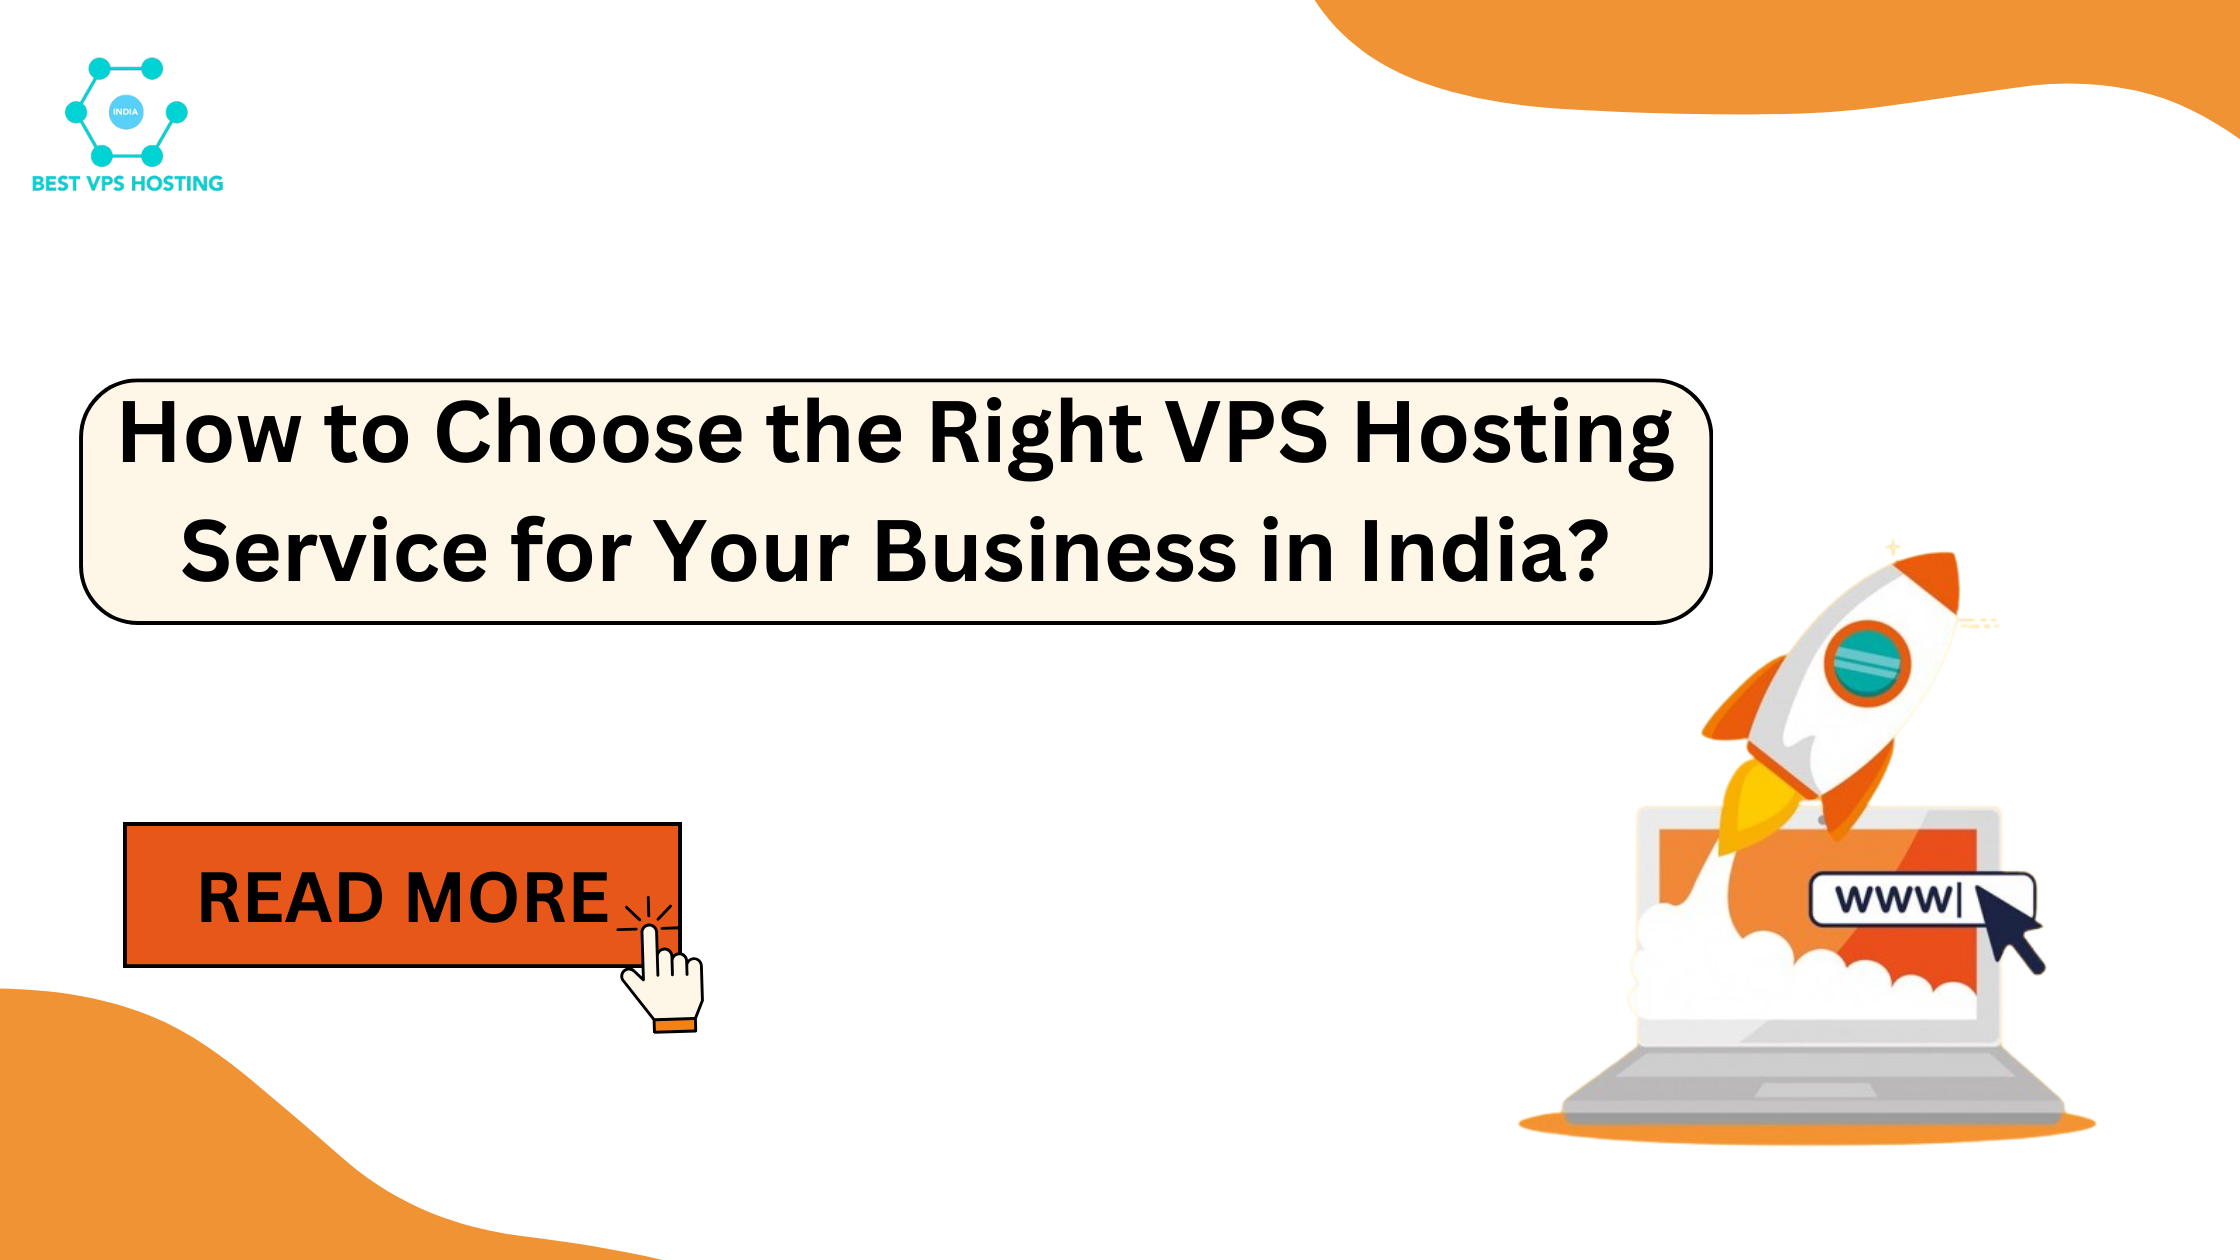 How to Choose the Right VPS Hosting Service for Your Business in India?